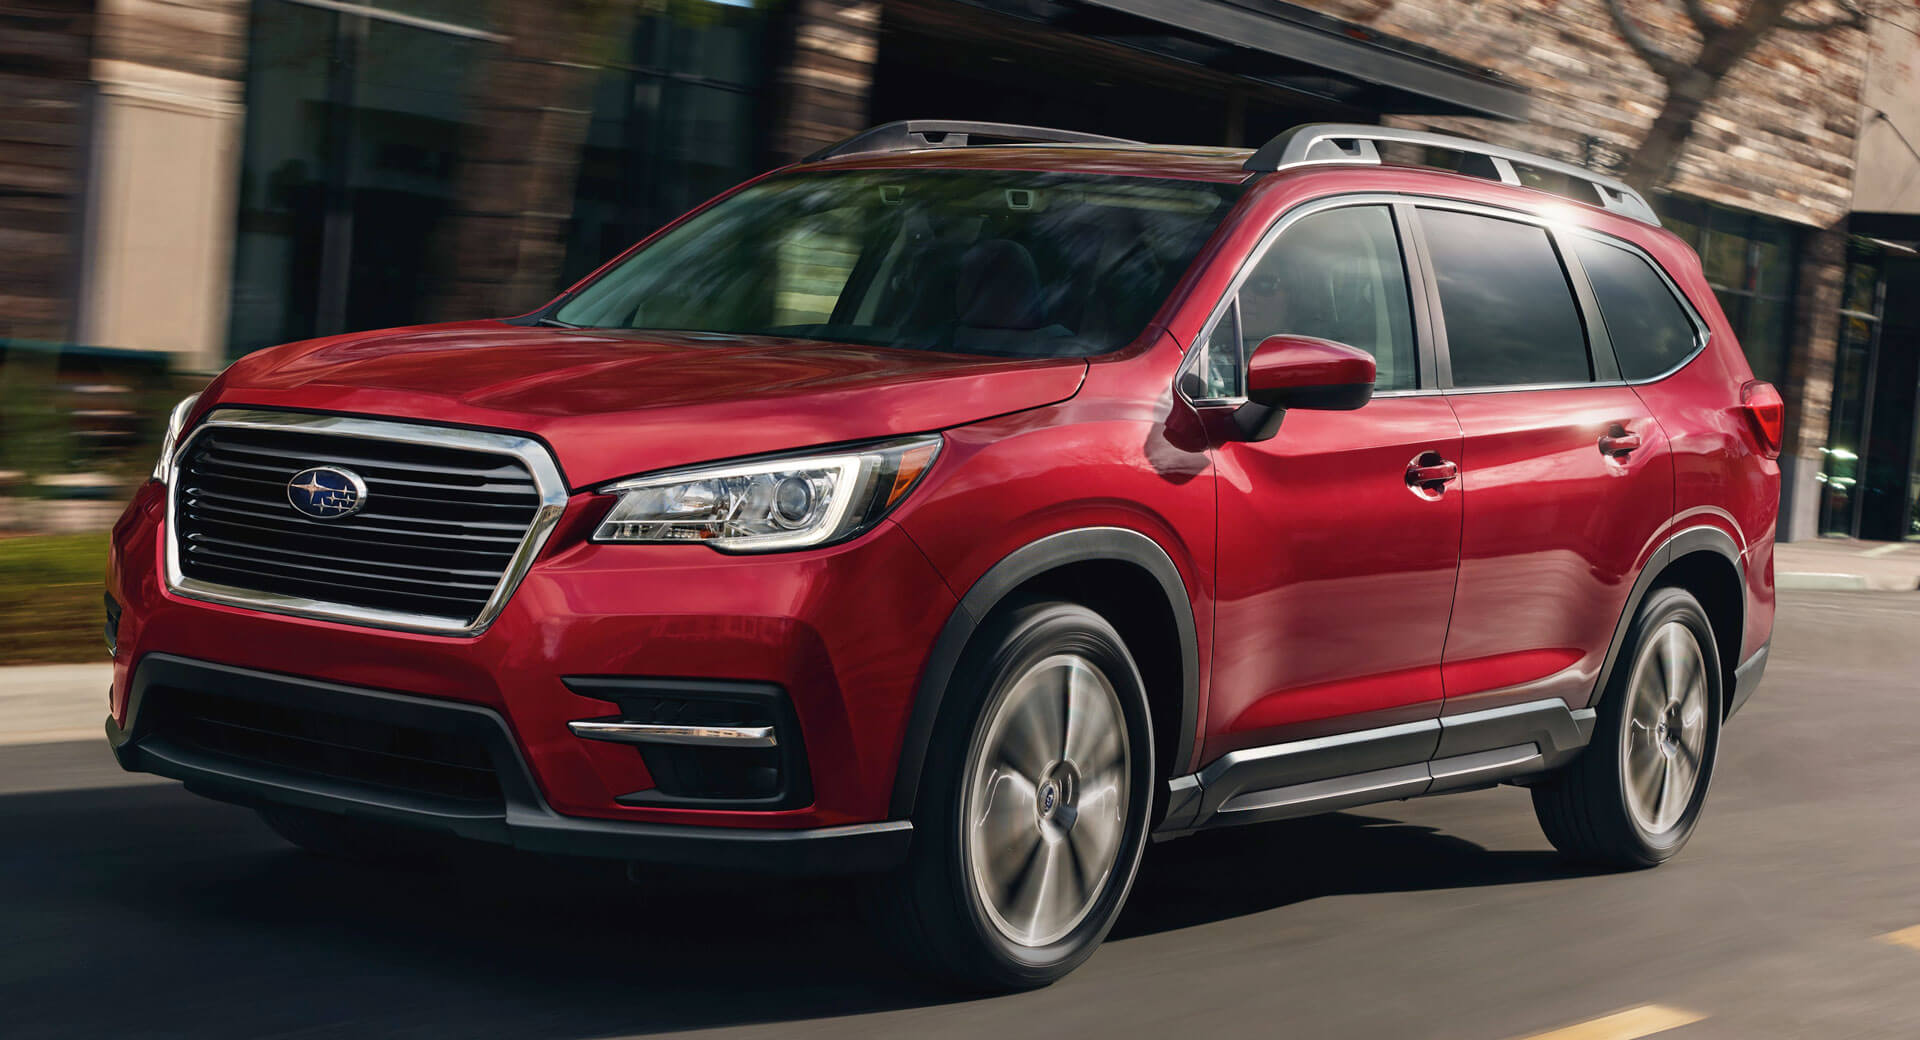 2020 Subaru Ascent Comes With Very Few Updates, Priced